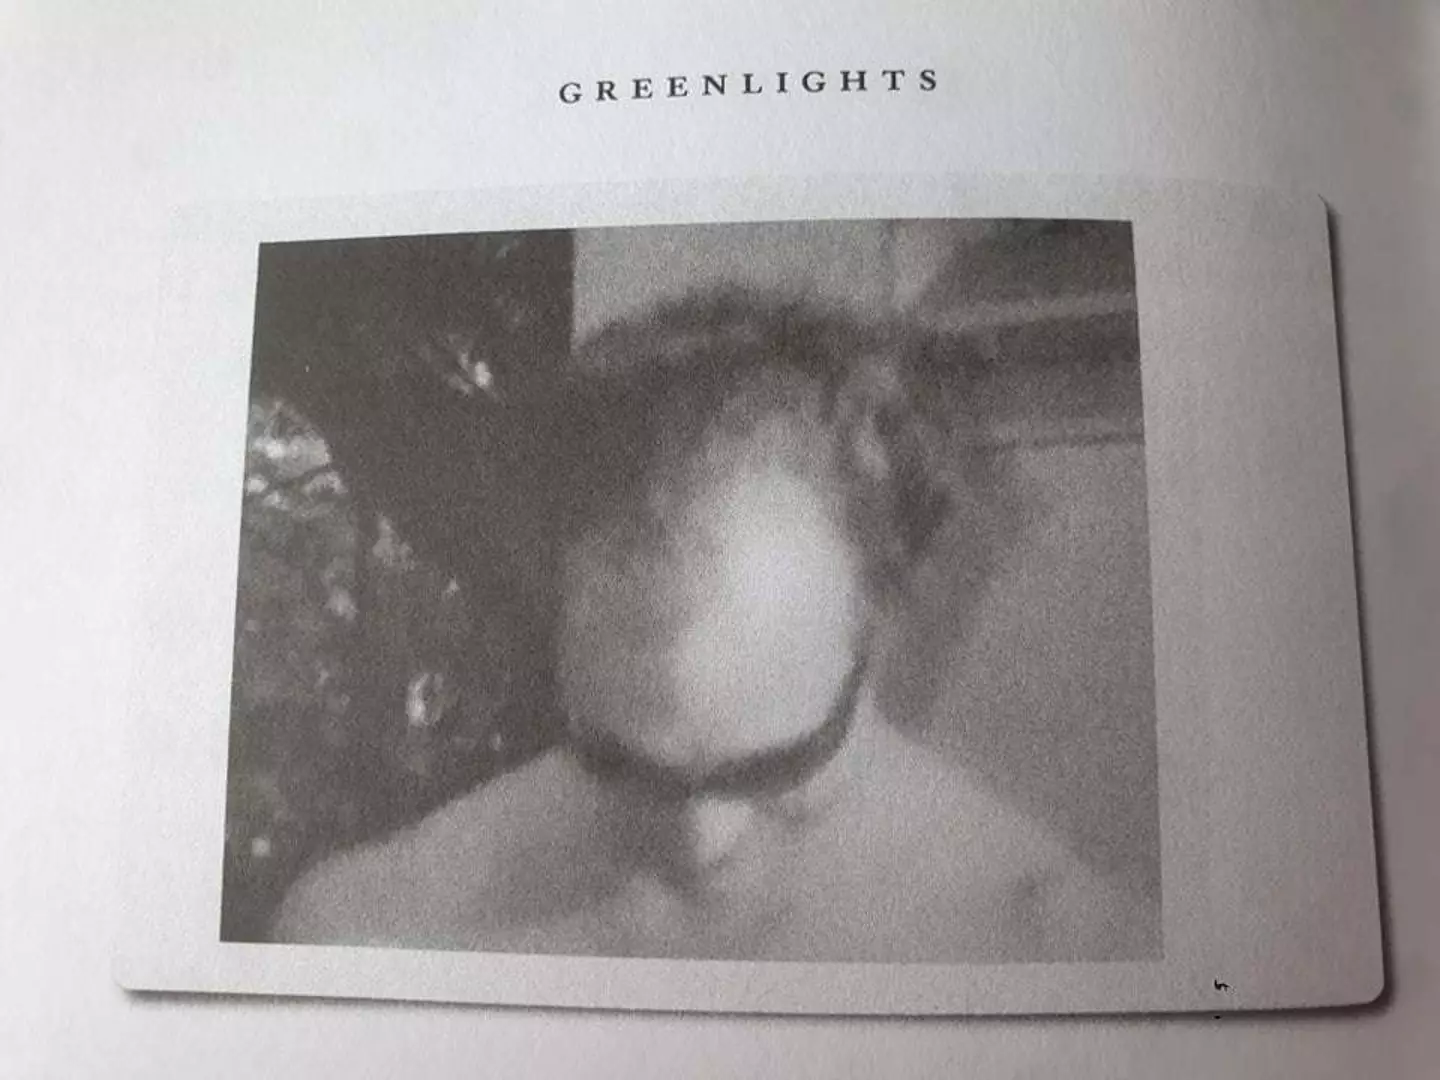 He opens up about his hair loss in his memoir, Greenlights.